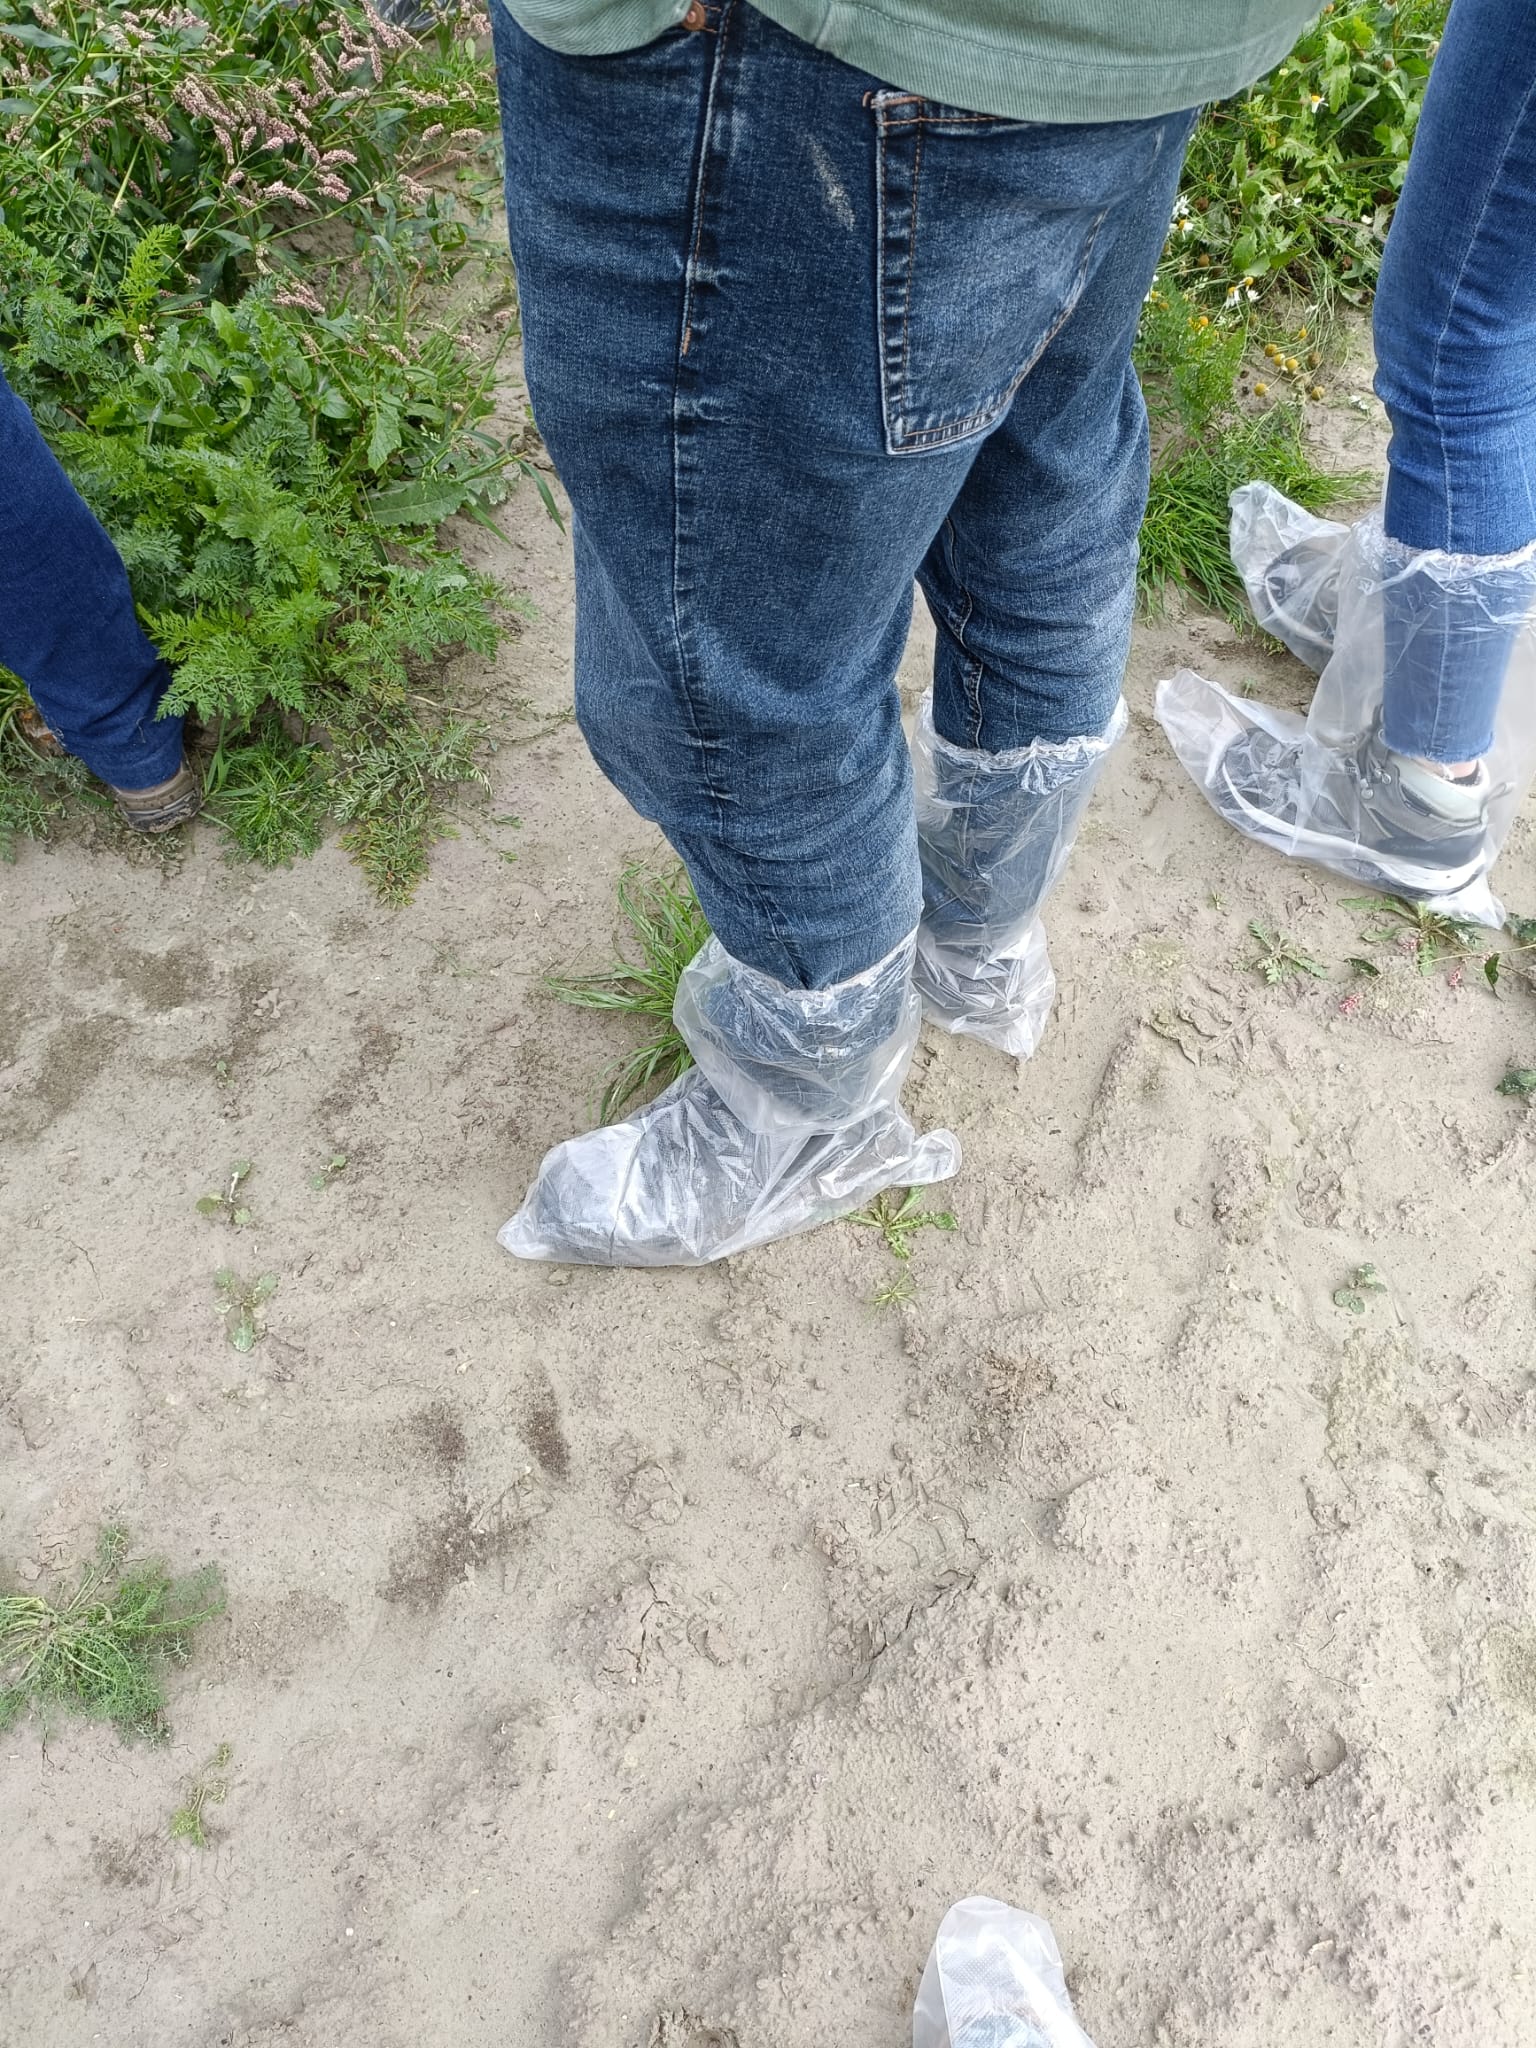 In field excursion wearing disposable shoe coverings